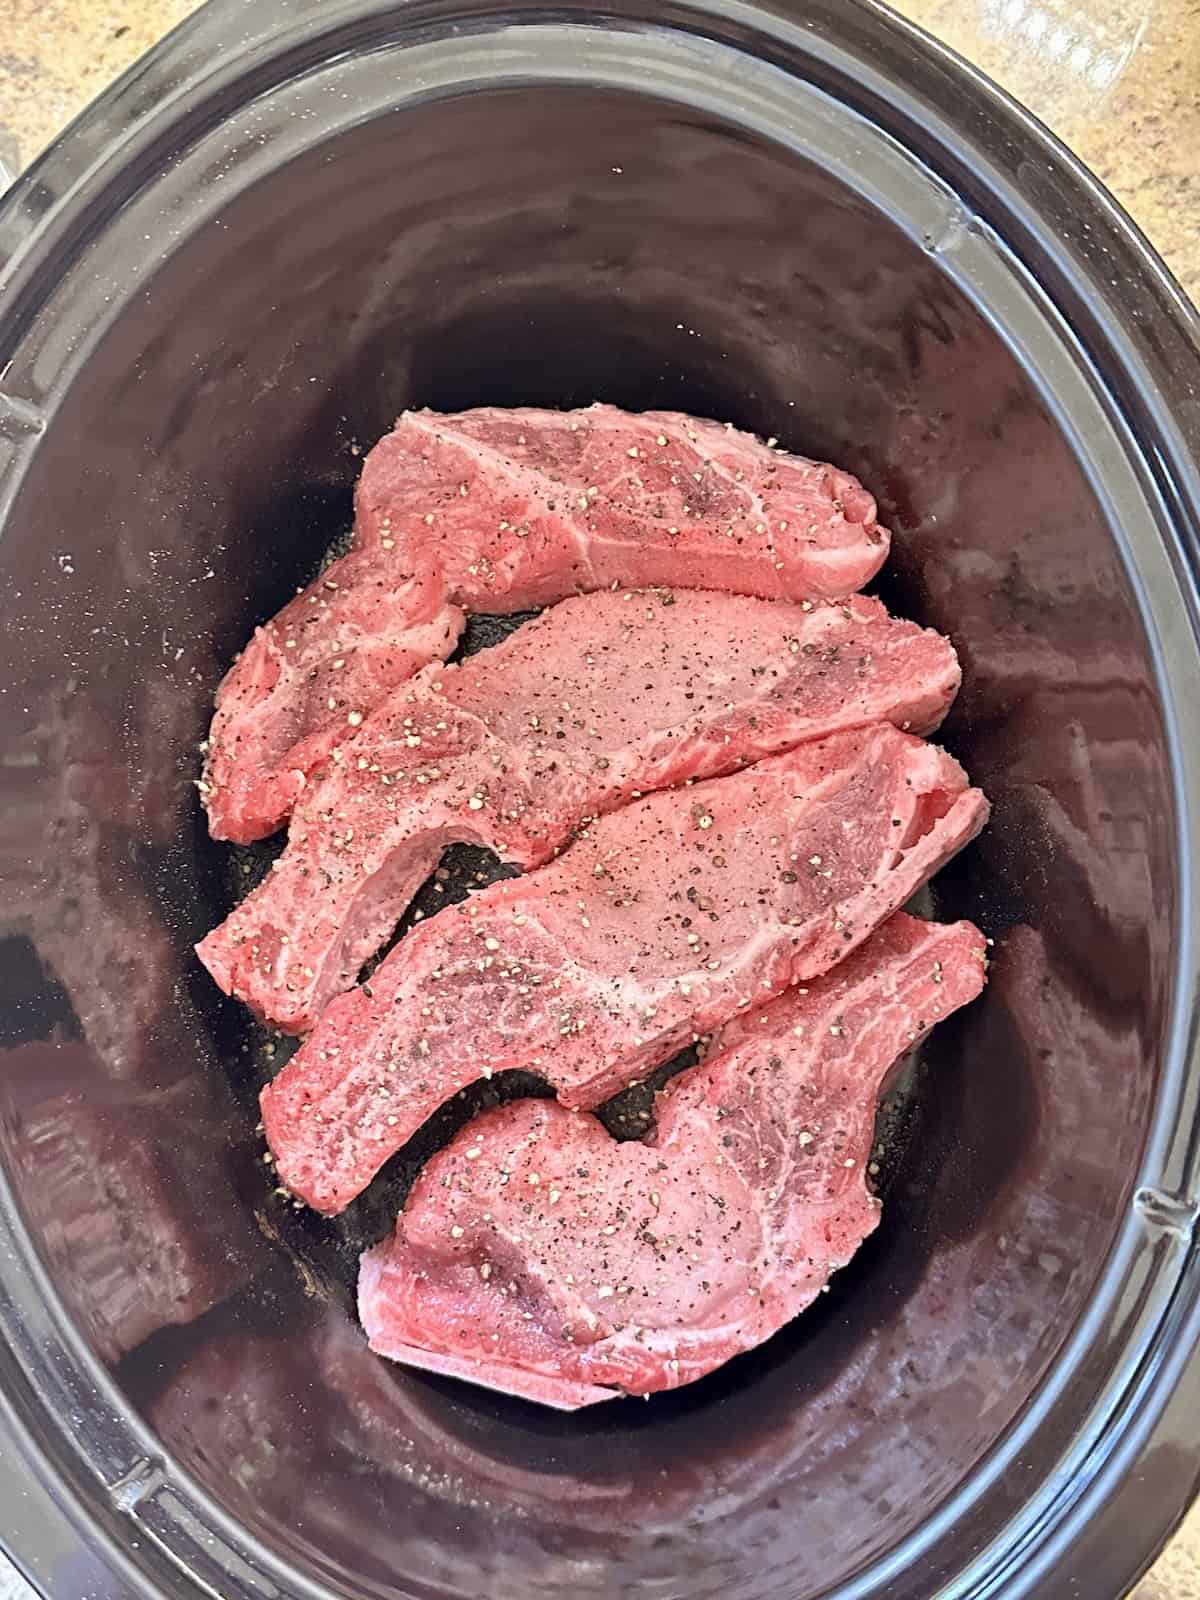 uncooked pork butt ribs in a slow cooker